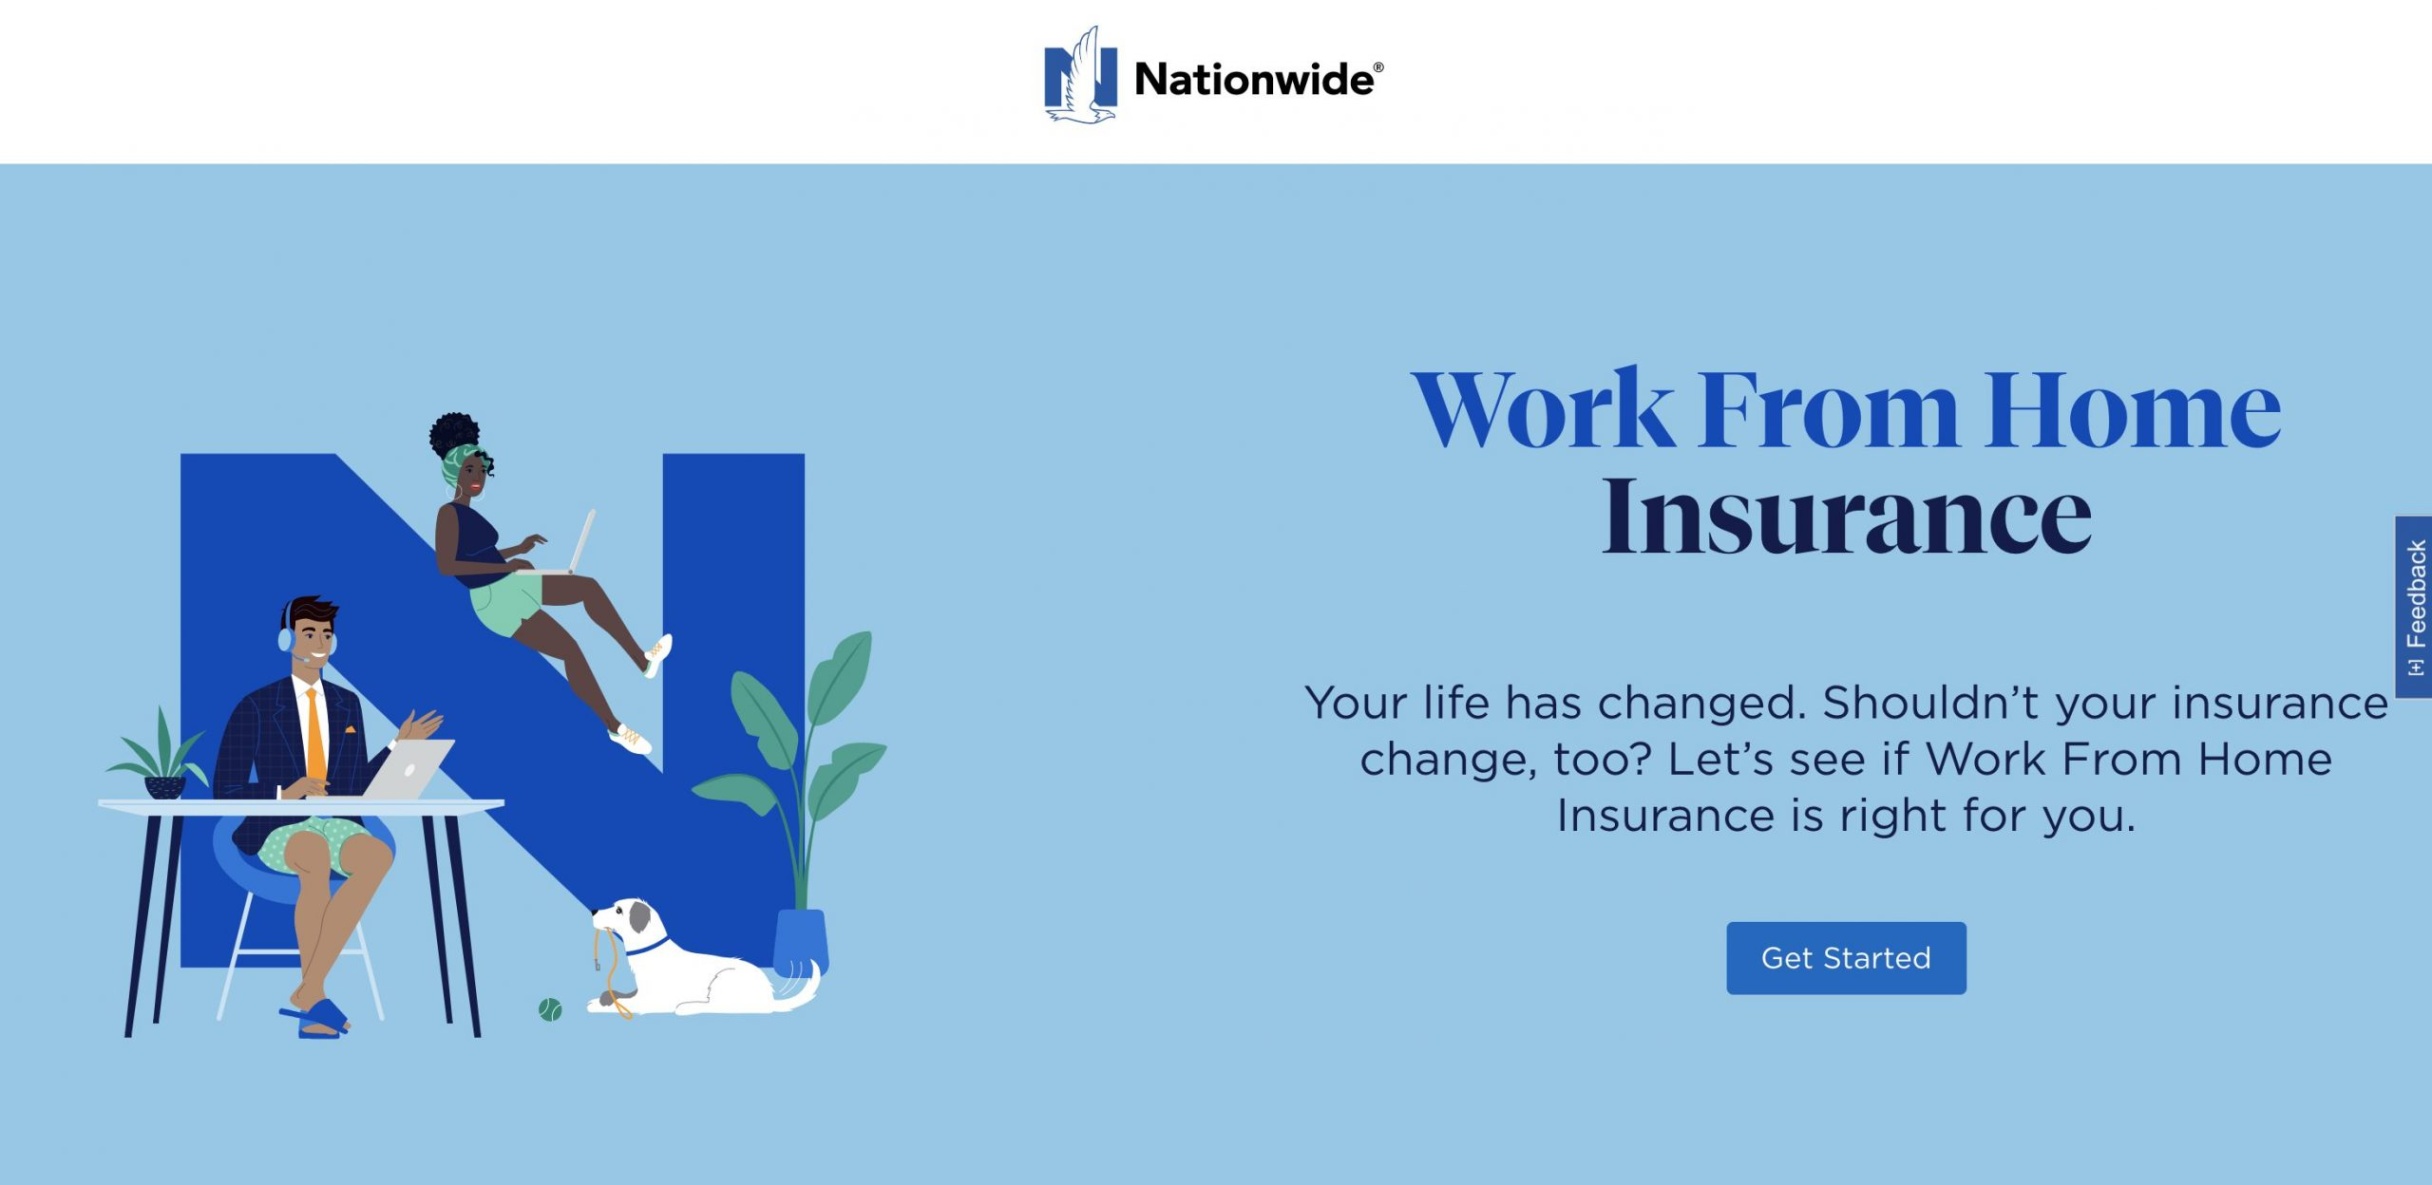 Easy Peasy Nationwide Home Insurance Login: Secure Your Home In A Click!